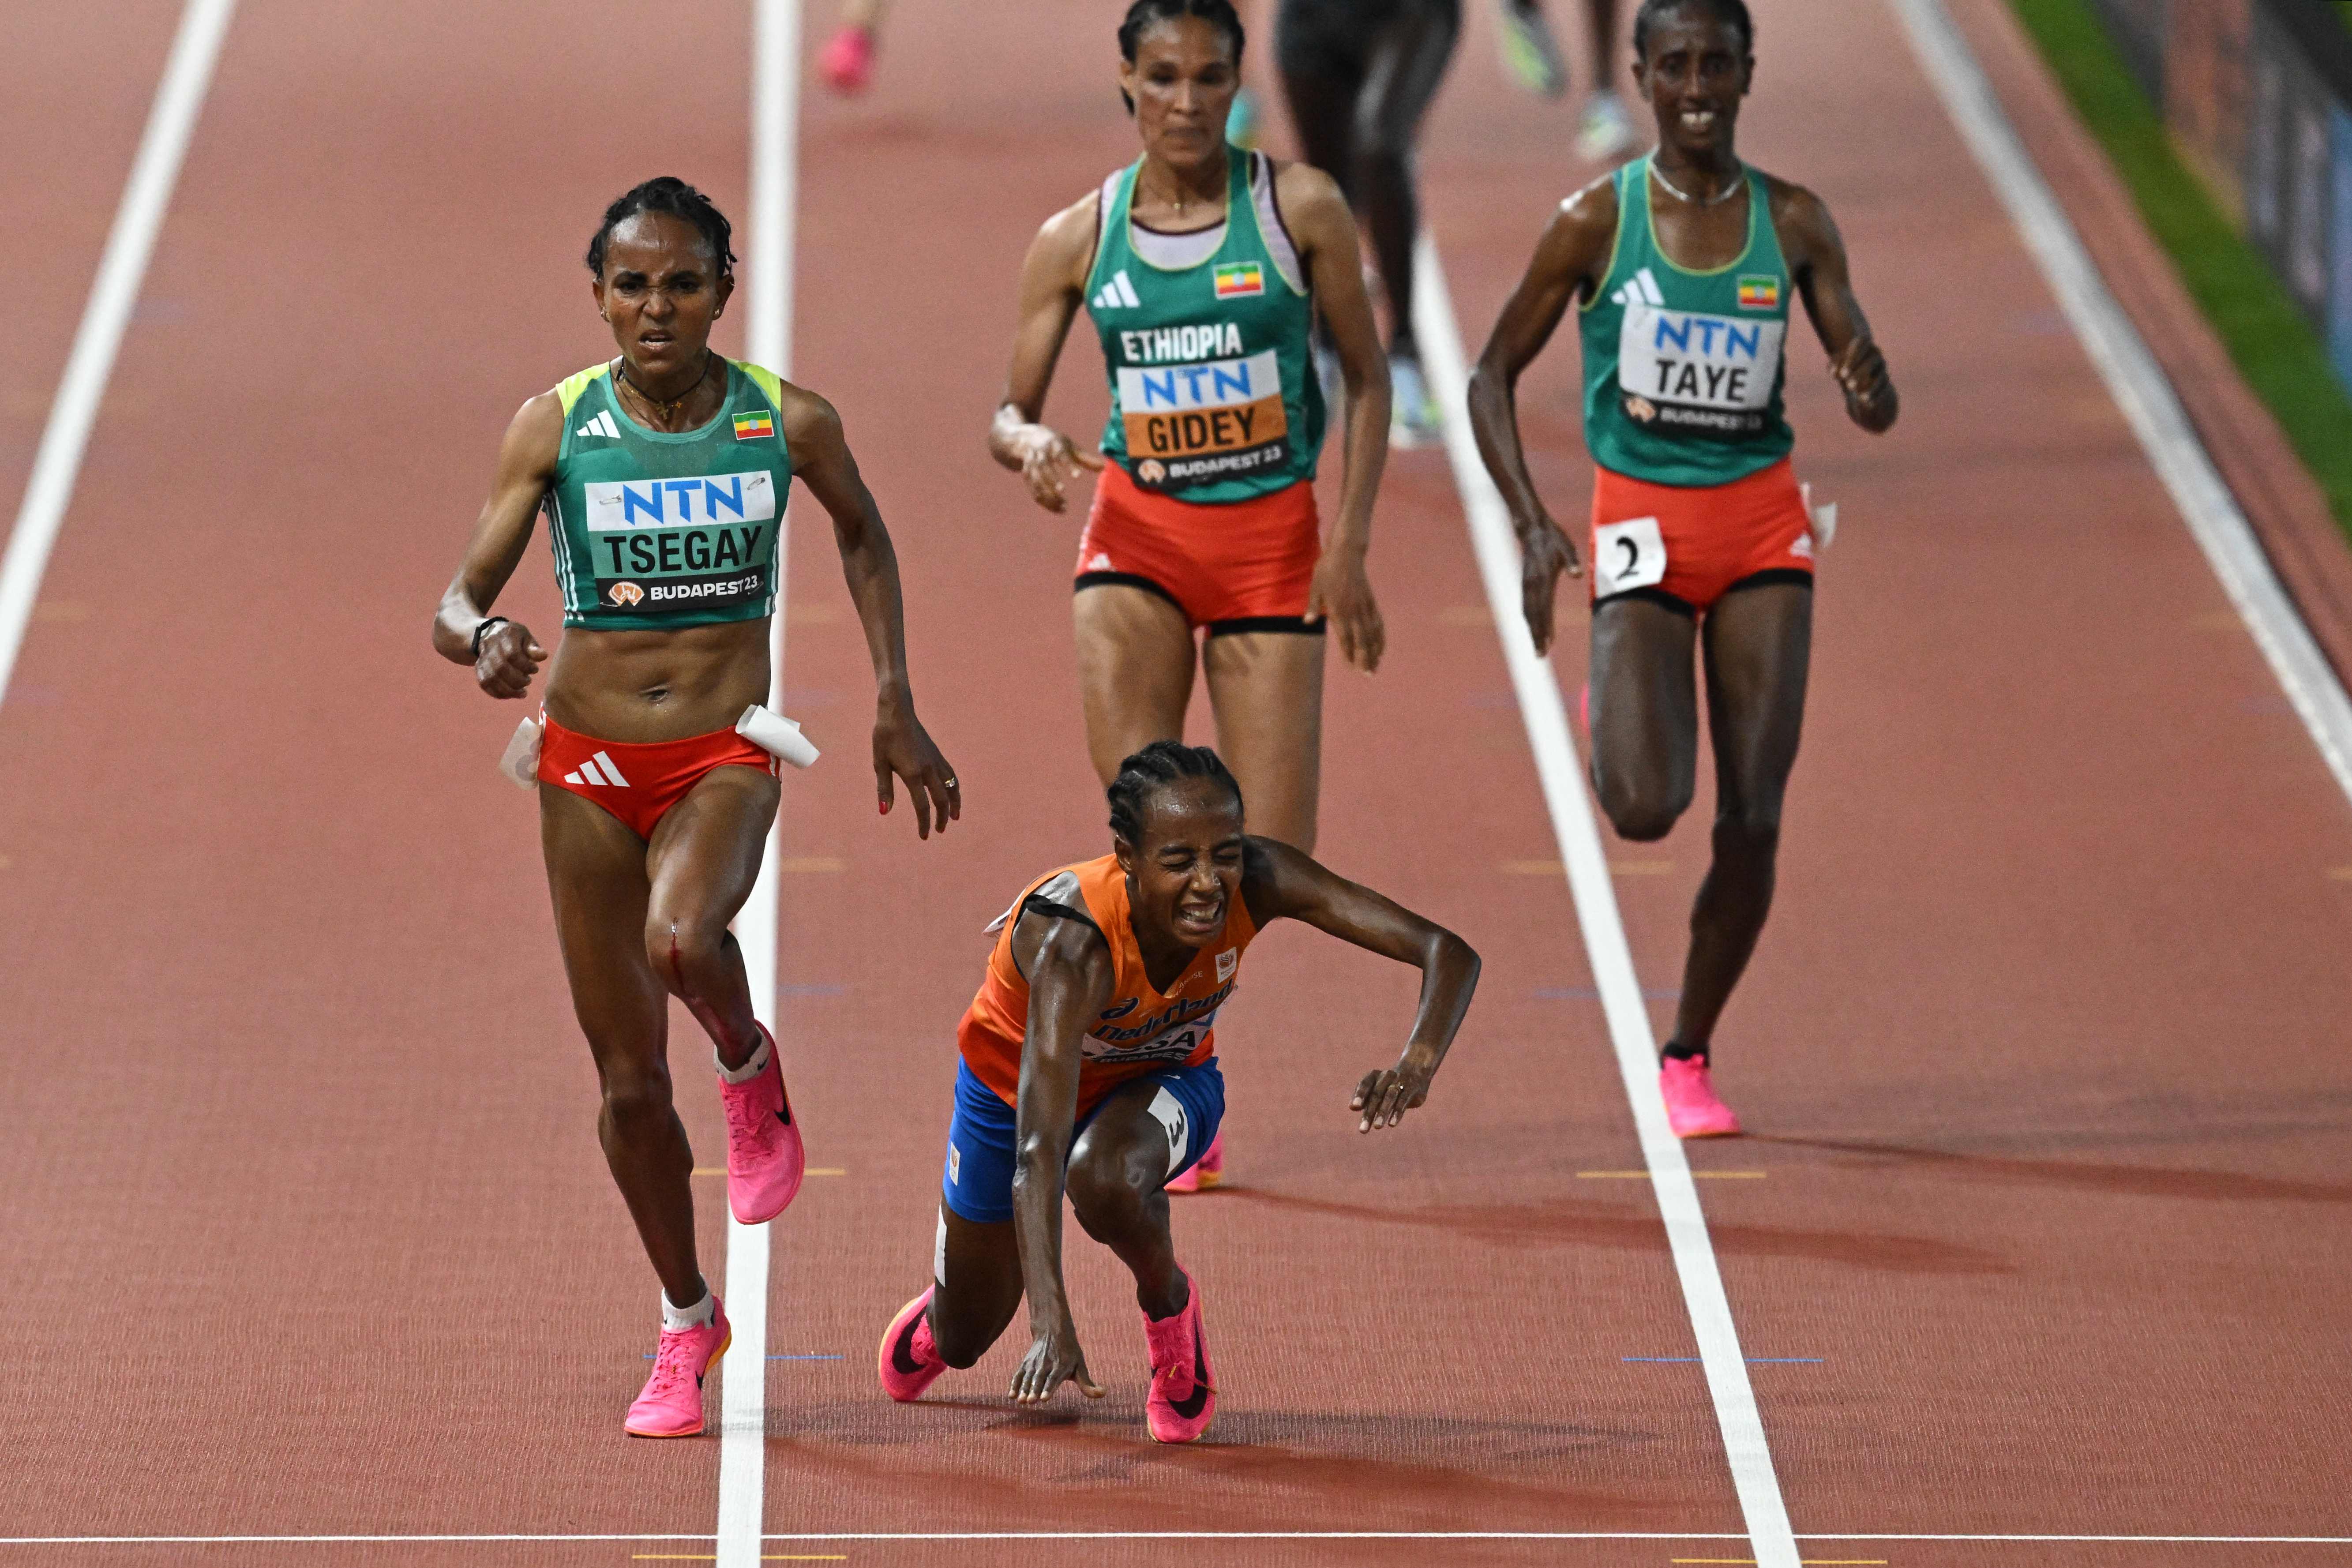 Sifan Hassan also fell in the closing stages of her race